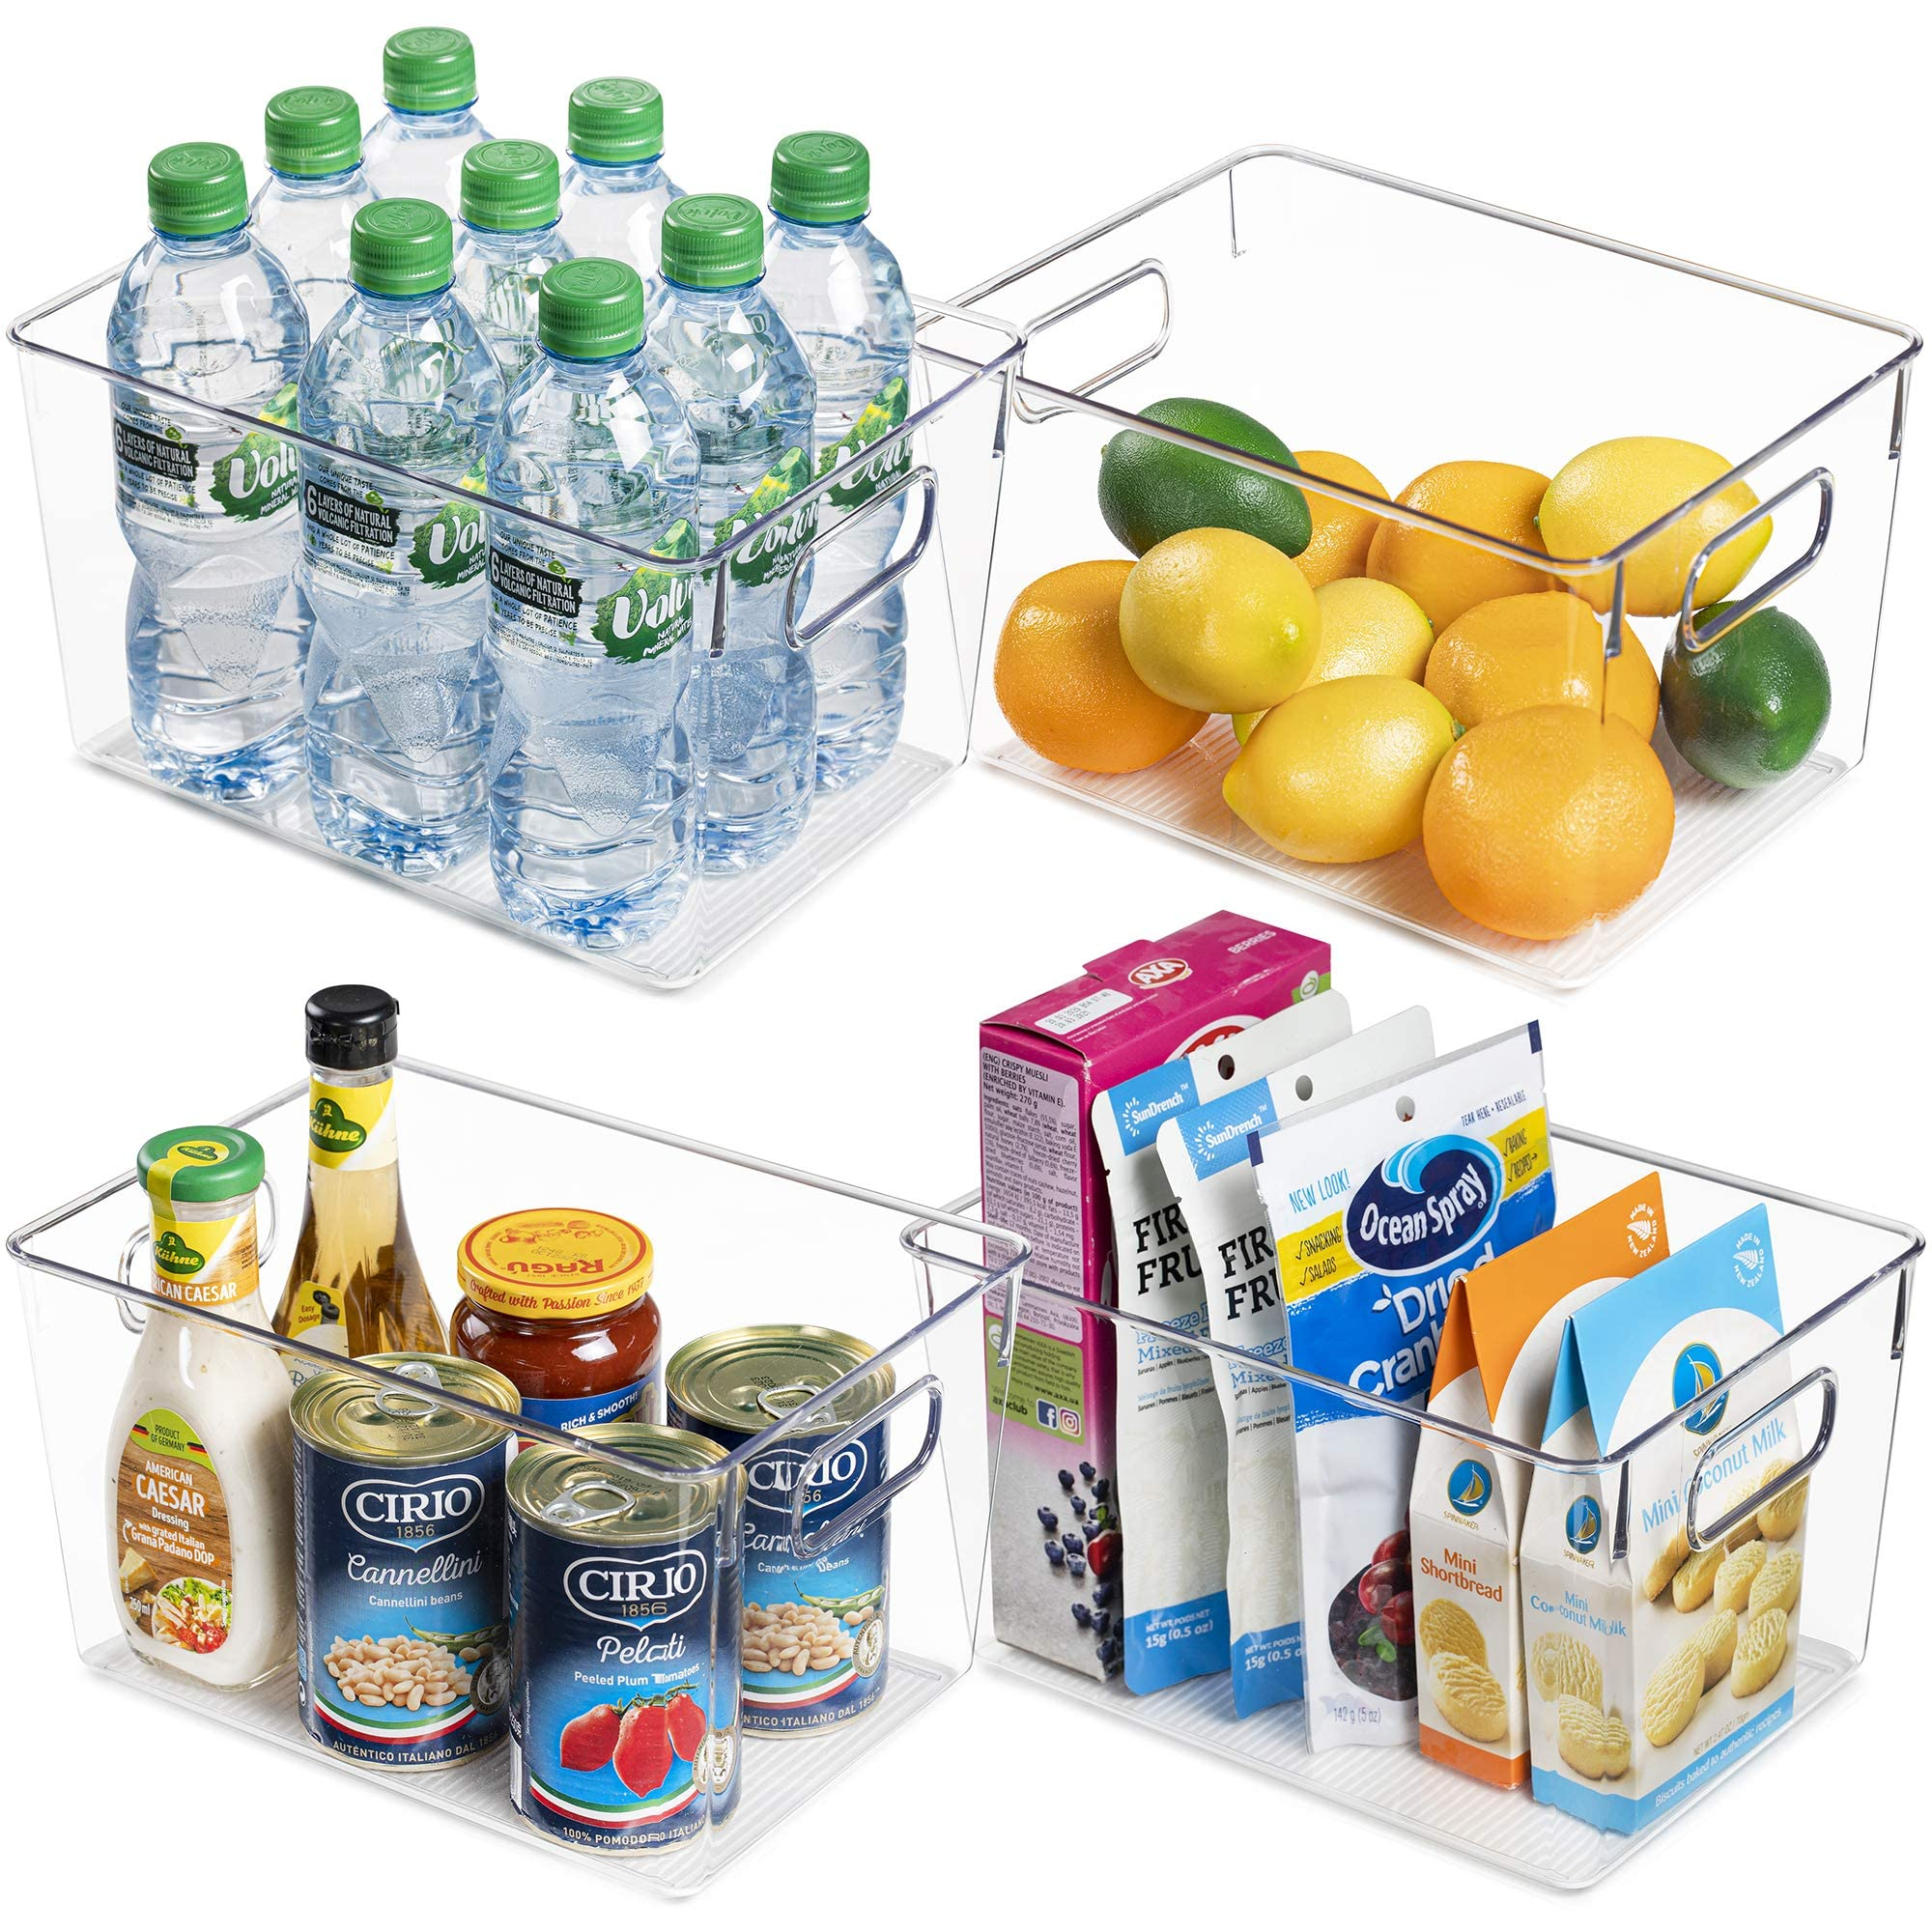 Vtopmart 4 Pack Large Stackable Storage Drawers,Clear Acrylic Drawer